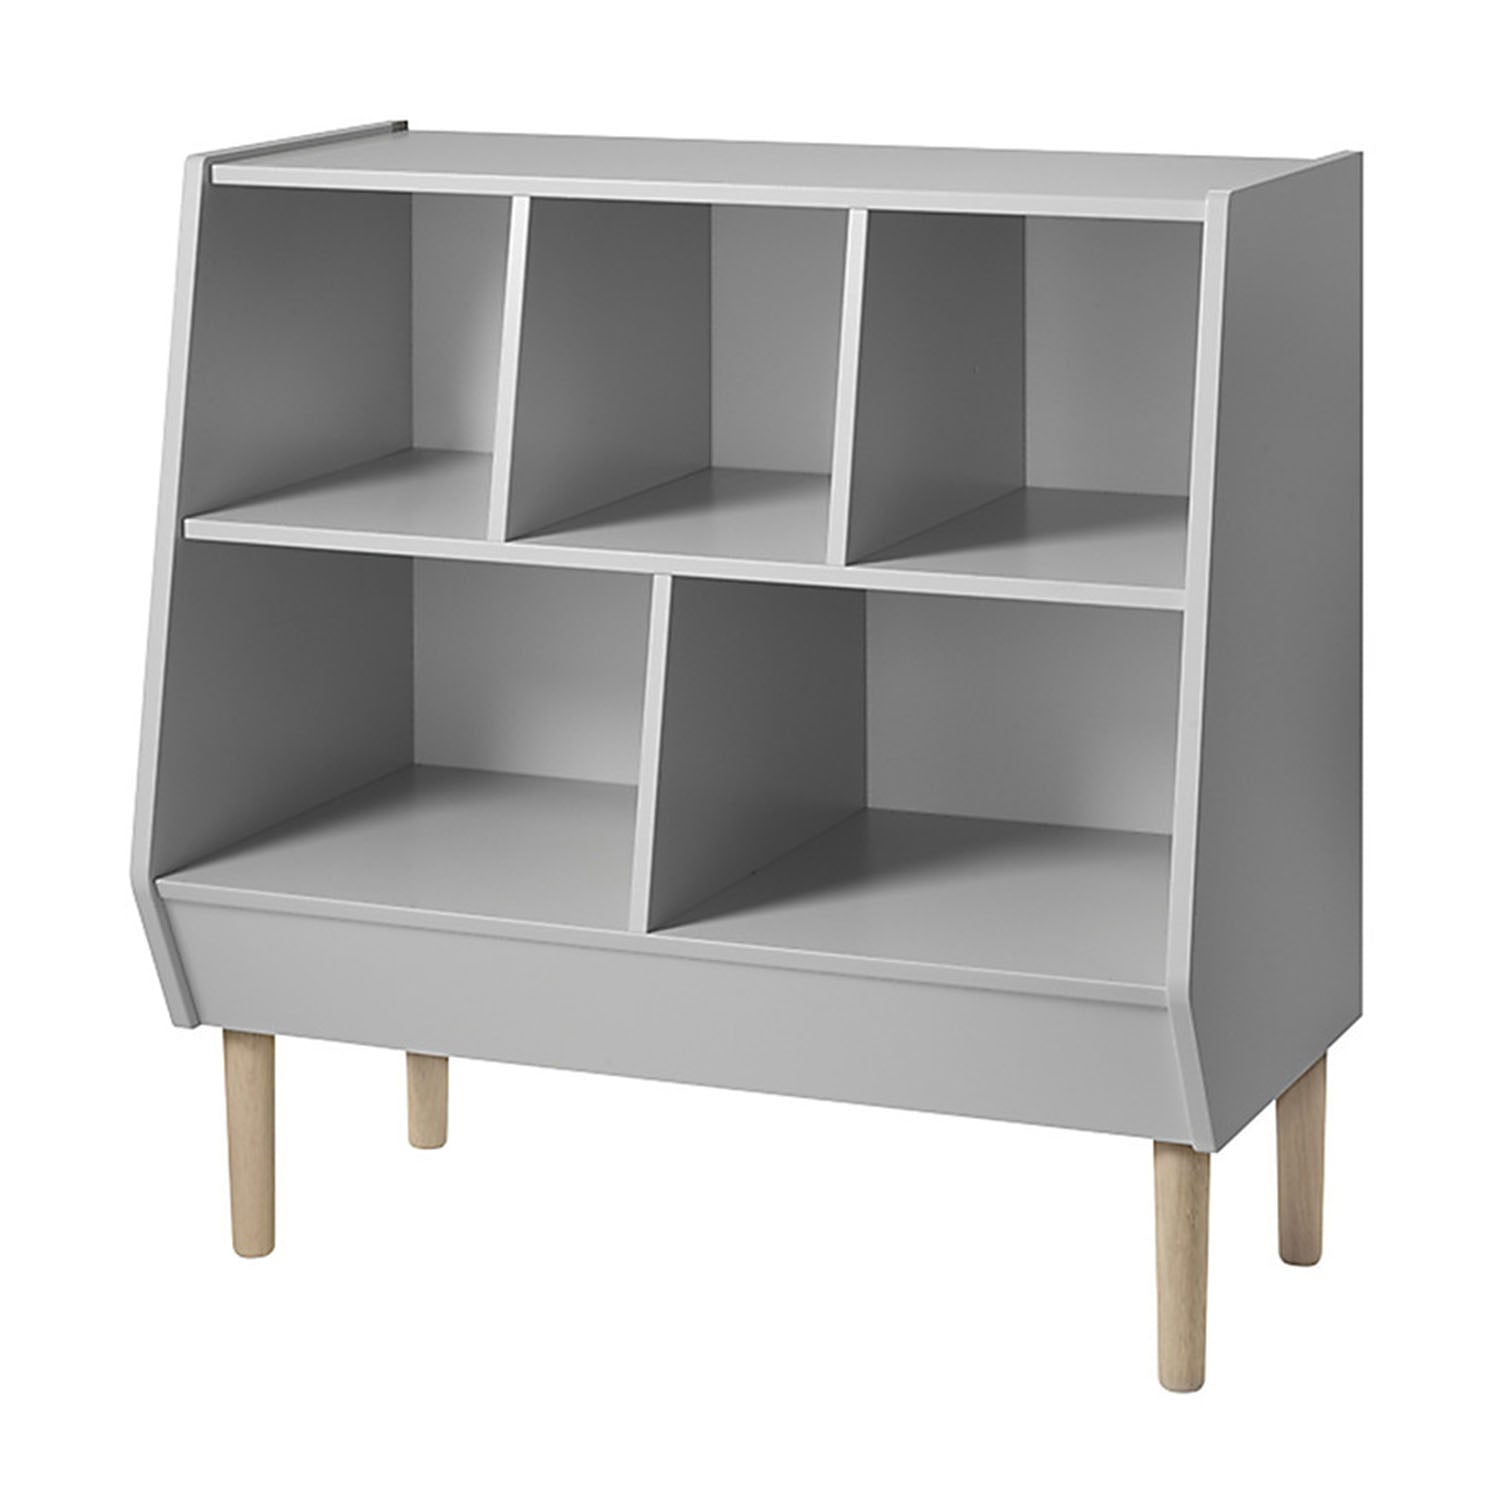 An image of Done By Deer Buy Baby Storage Rack Shelf Unit by Done by Deer White